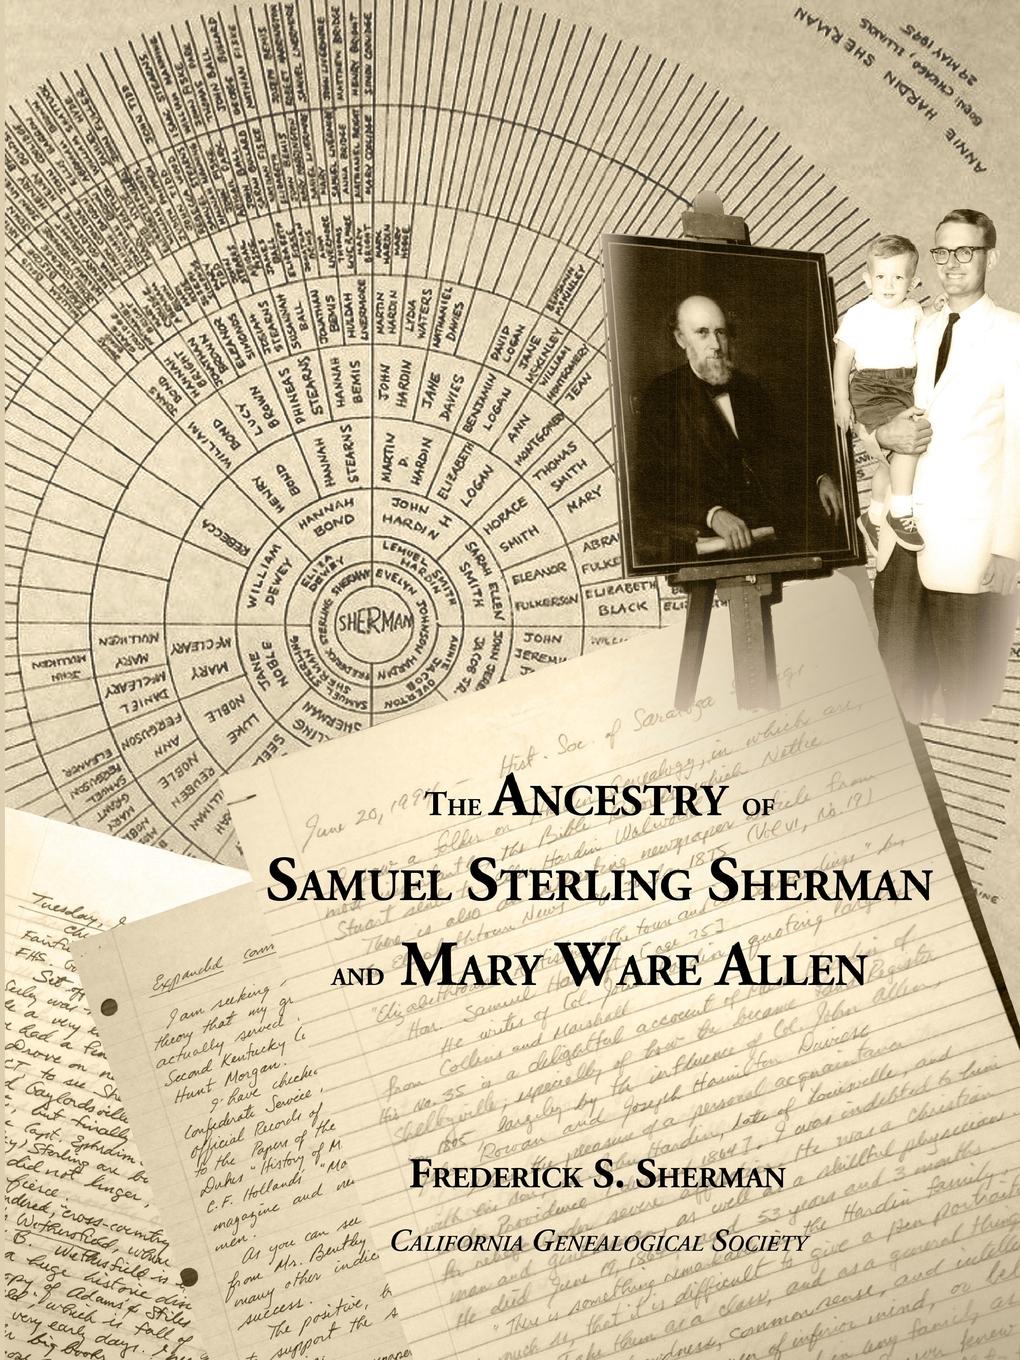 Frederick S. Sherman The Ancestry of Samuel Sterling Sherman and Mary Ware Allen